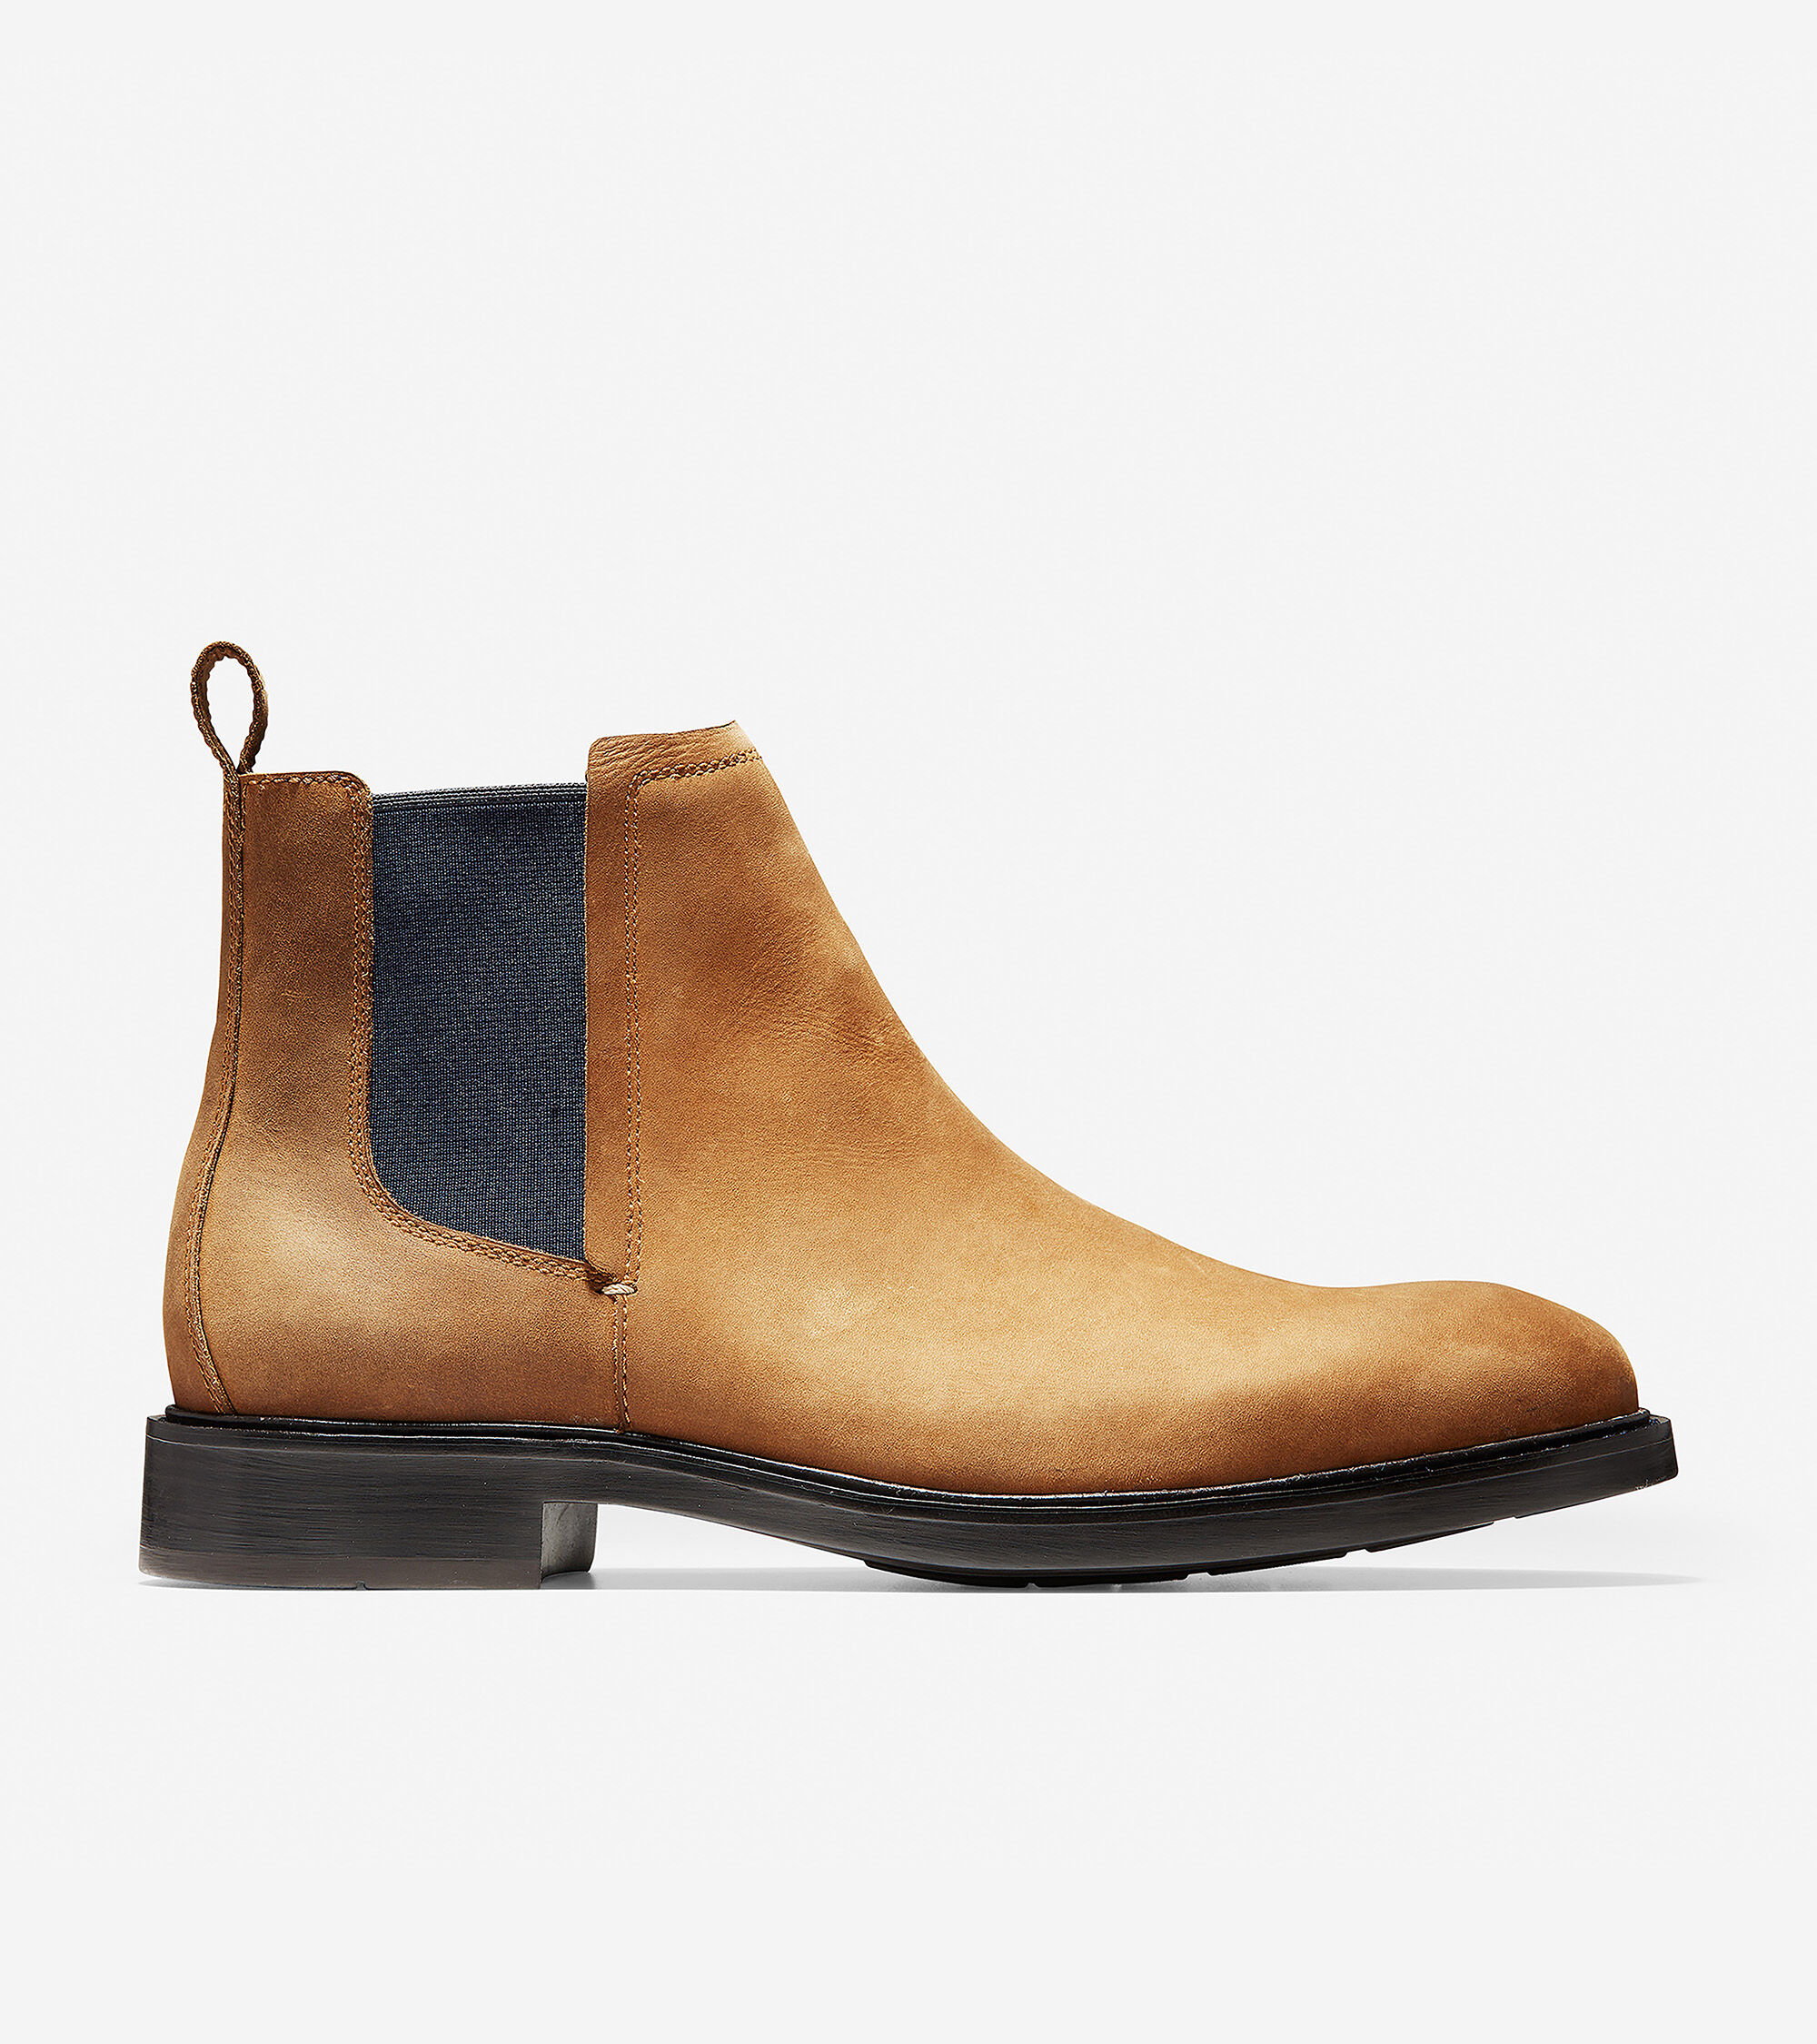 mens chelsea boots wide